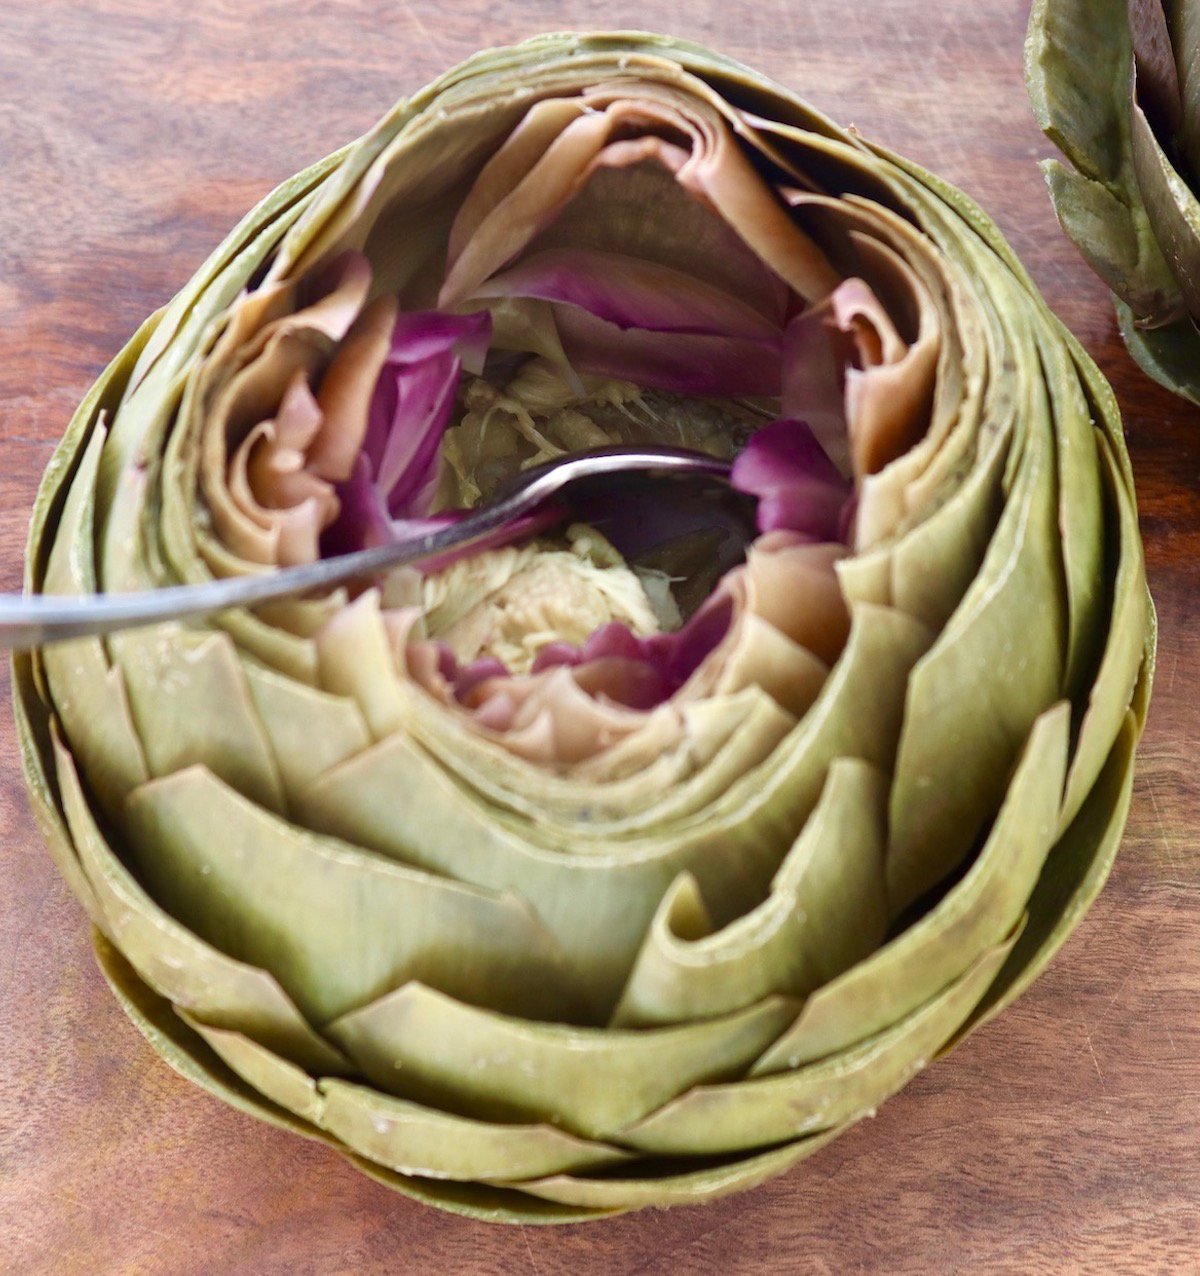 Spoon inside the middle of a steamed artichoke removing fuzz.